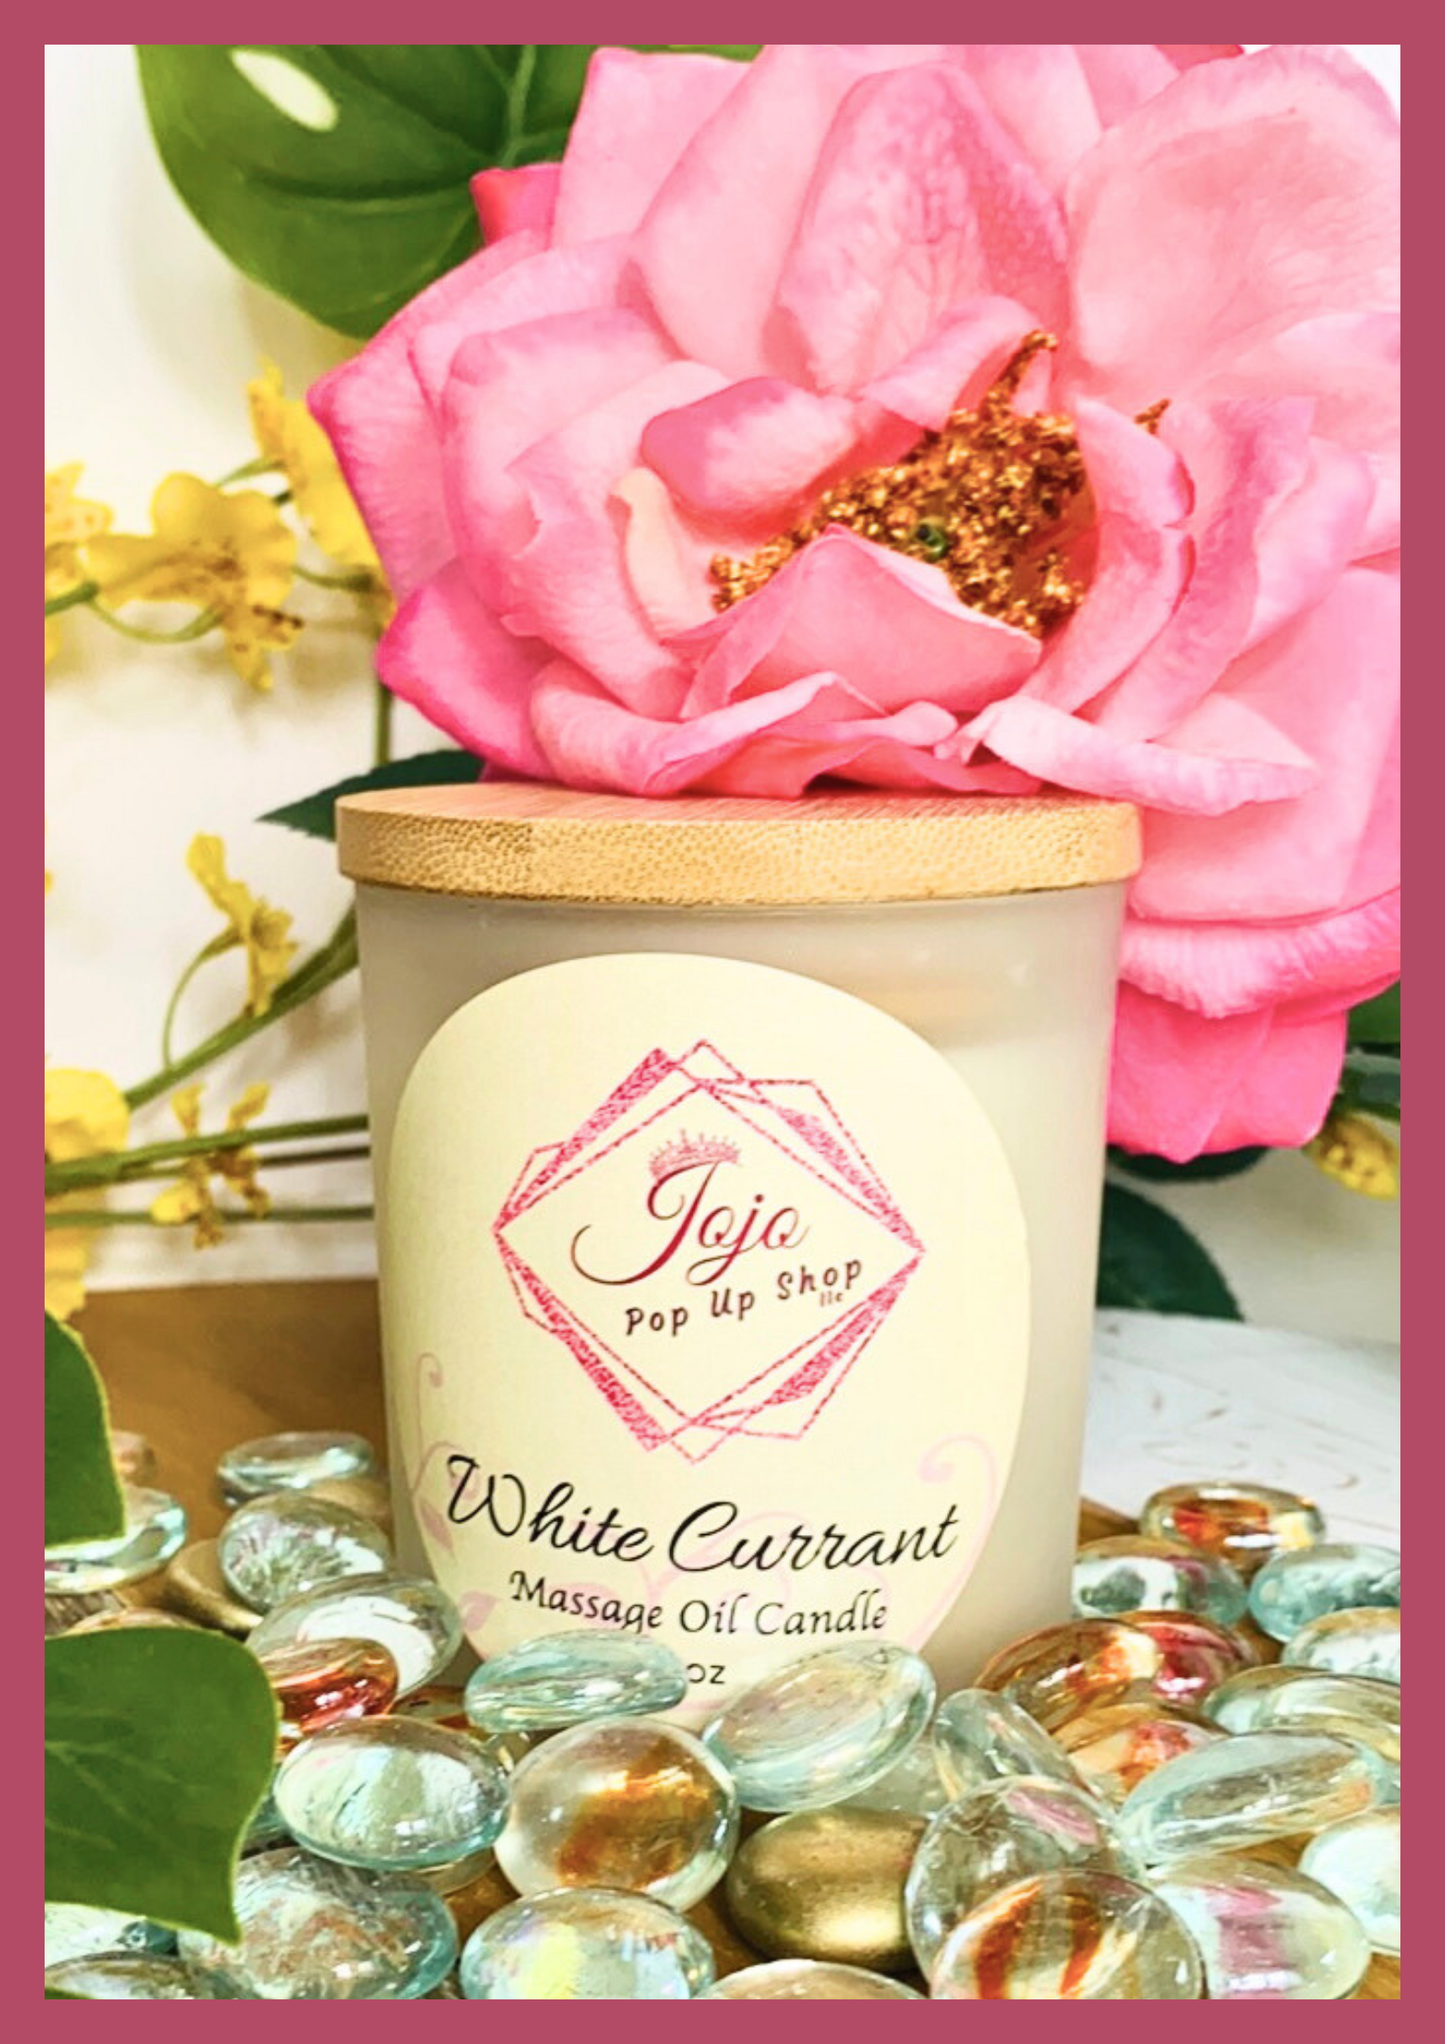 White Currant Massage Oil Candle